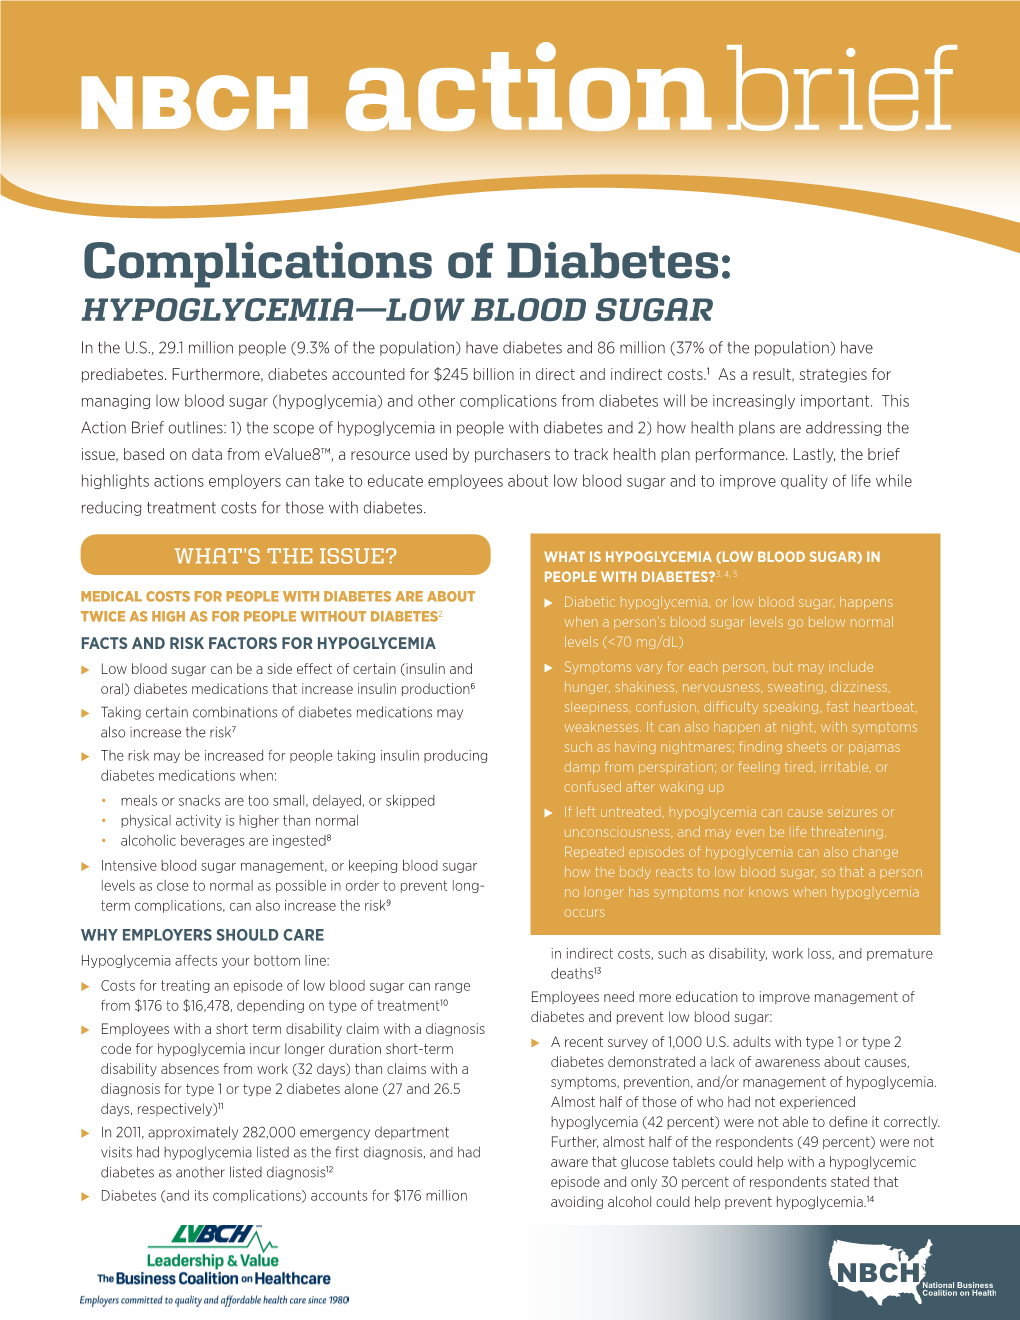 HYPOGLYCEMIA—LOW BLOOD SUGAR in the U.S., 29.1 Million People (9.3% of the Population) Have Diabetes and 86 Million (37% of the Population) Have Prediabetes